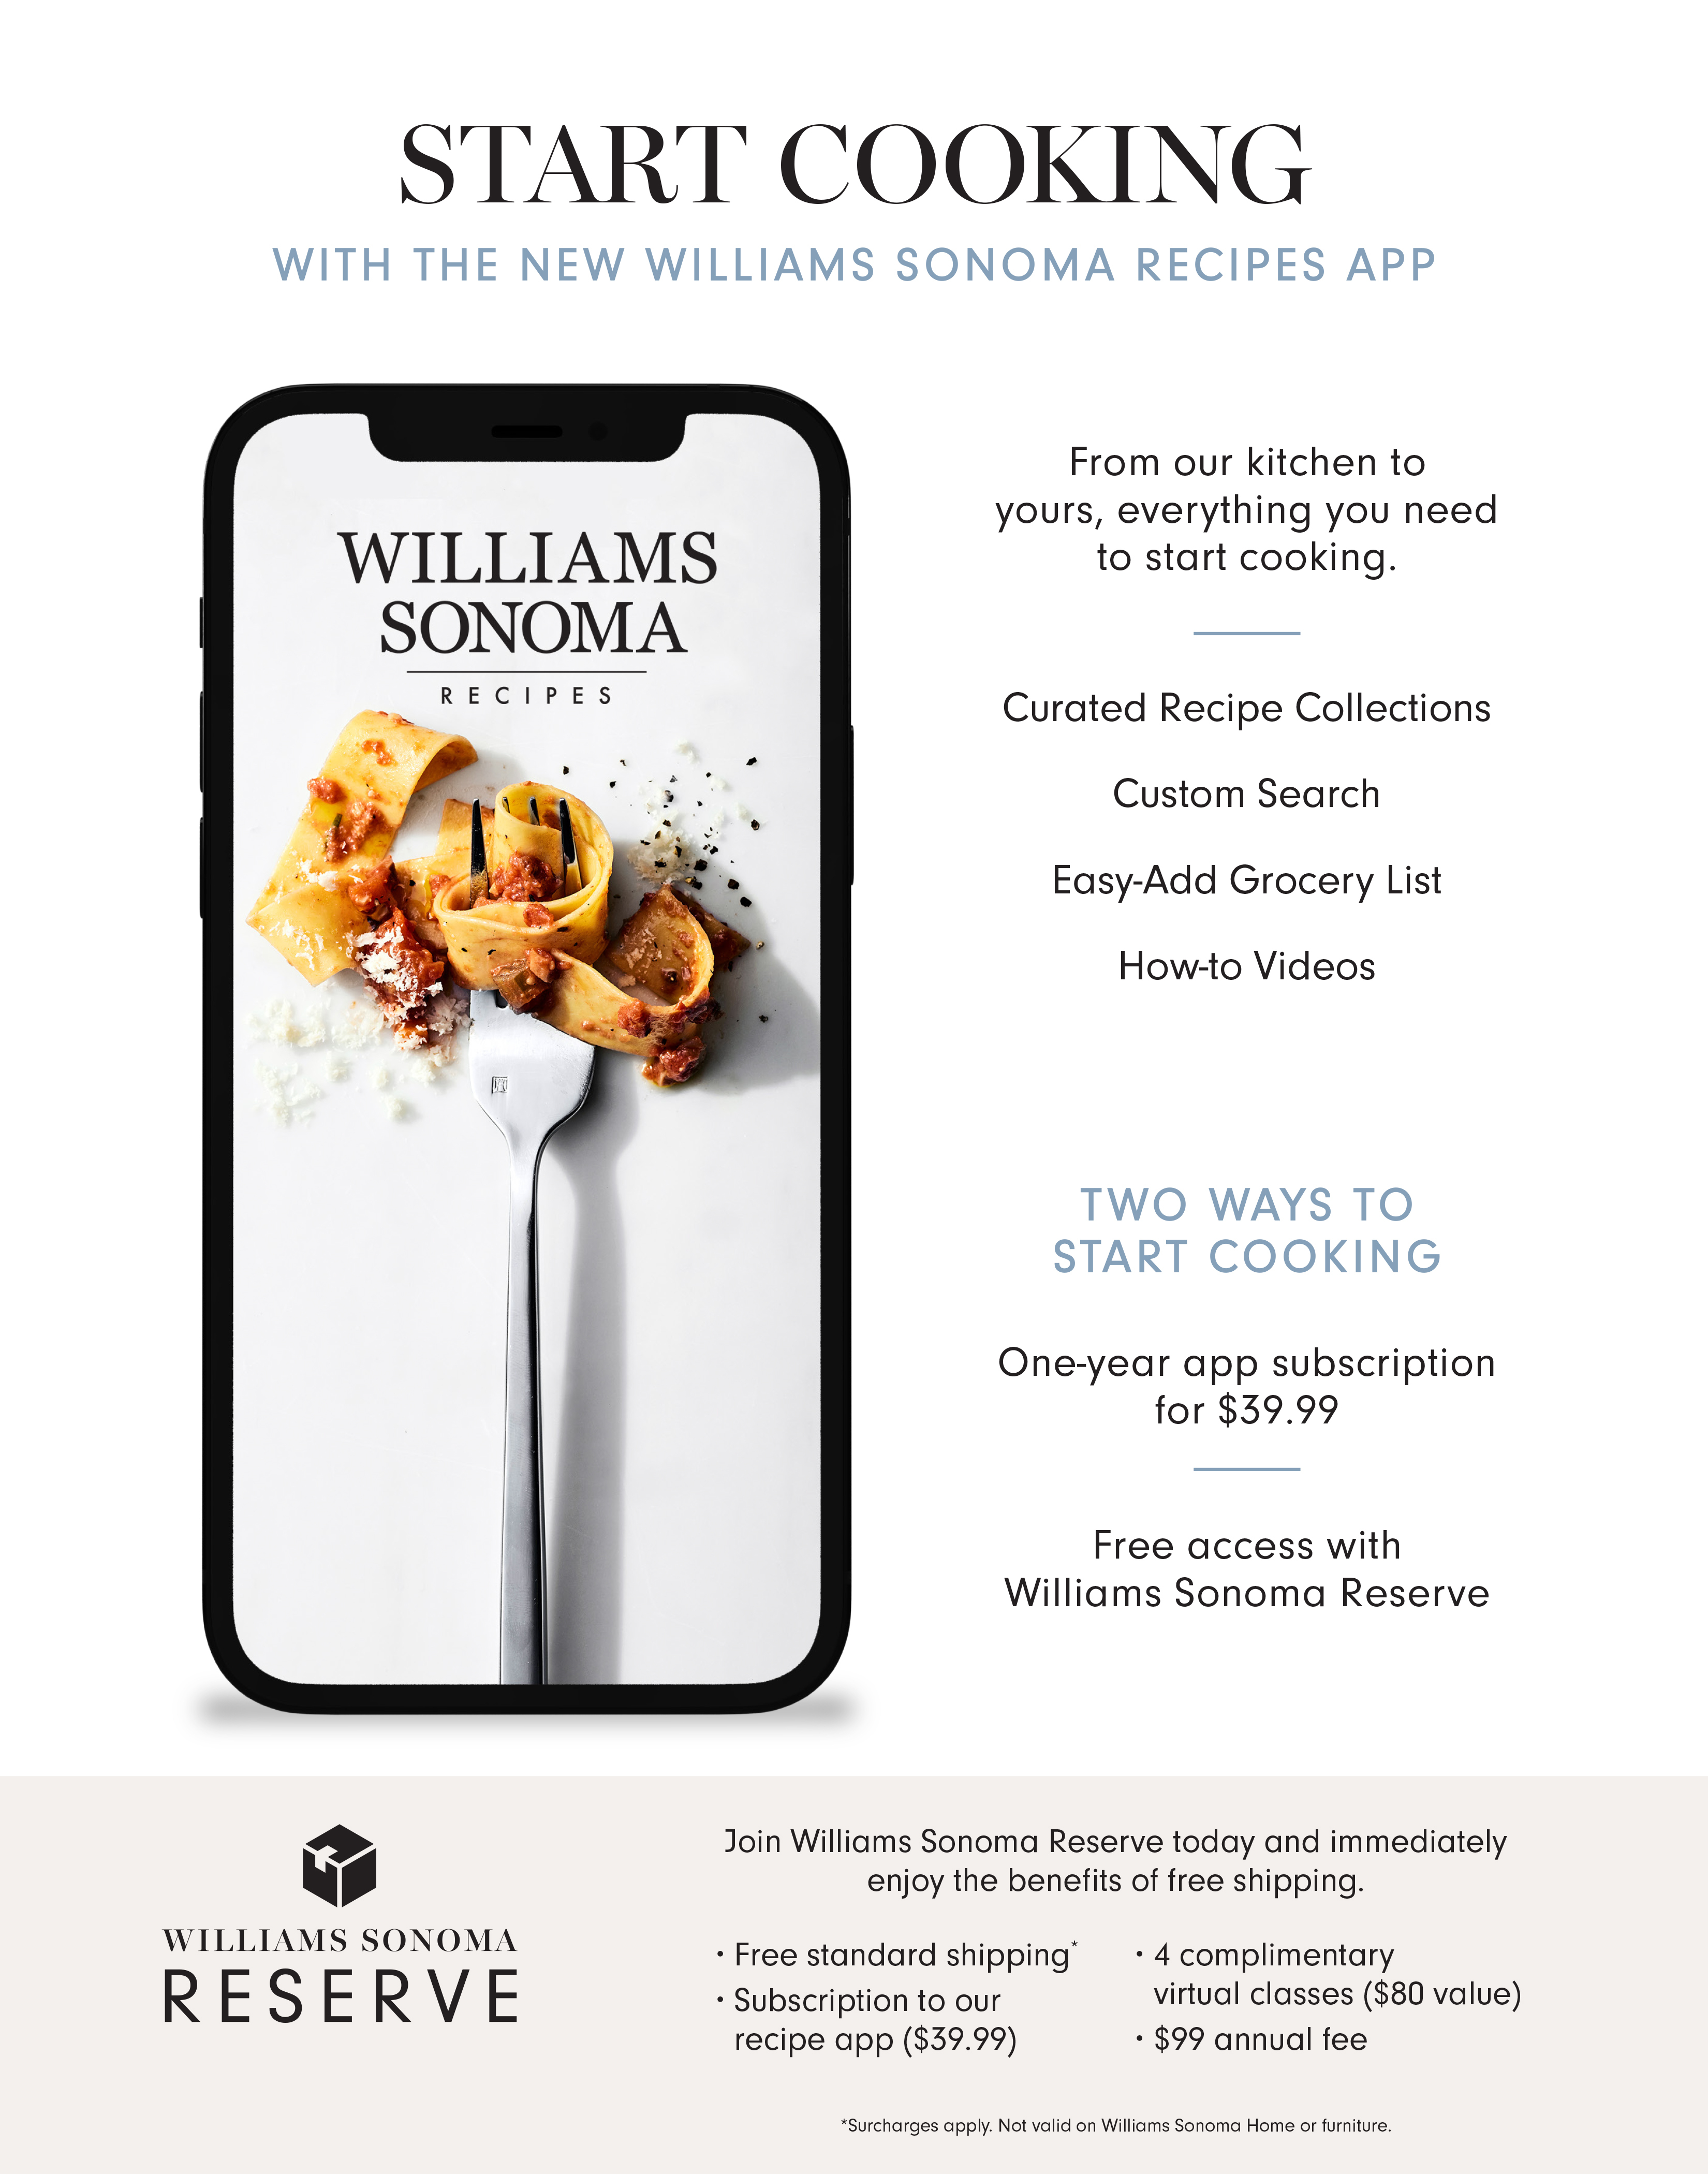 Williams Sonoma Test Kitchen Tour - Where Williams Sonoma Tests Its Products